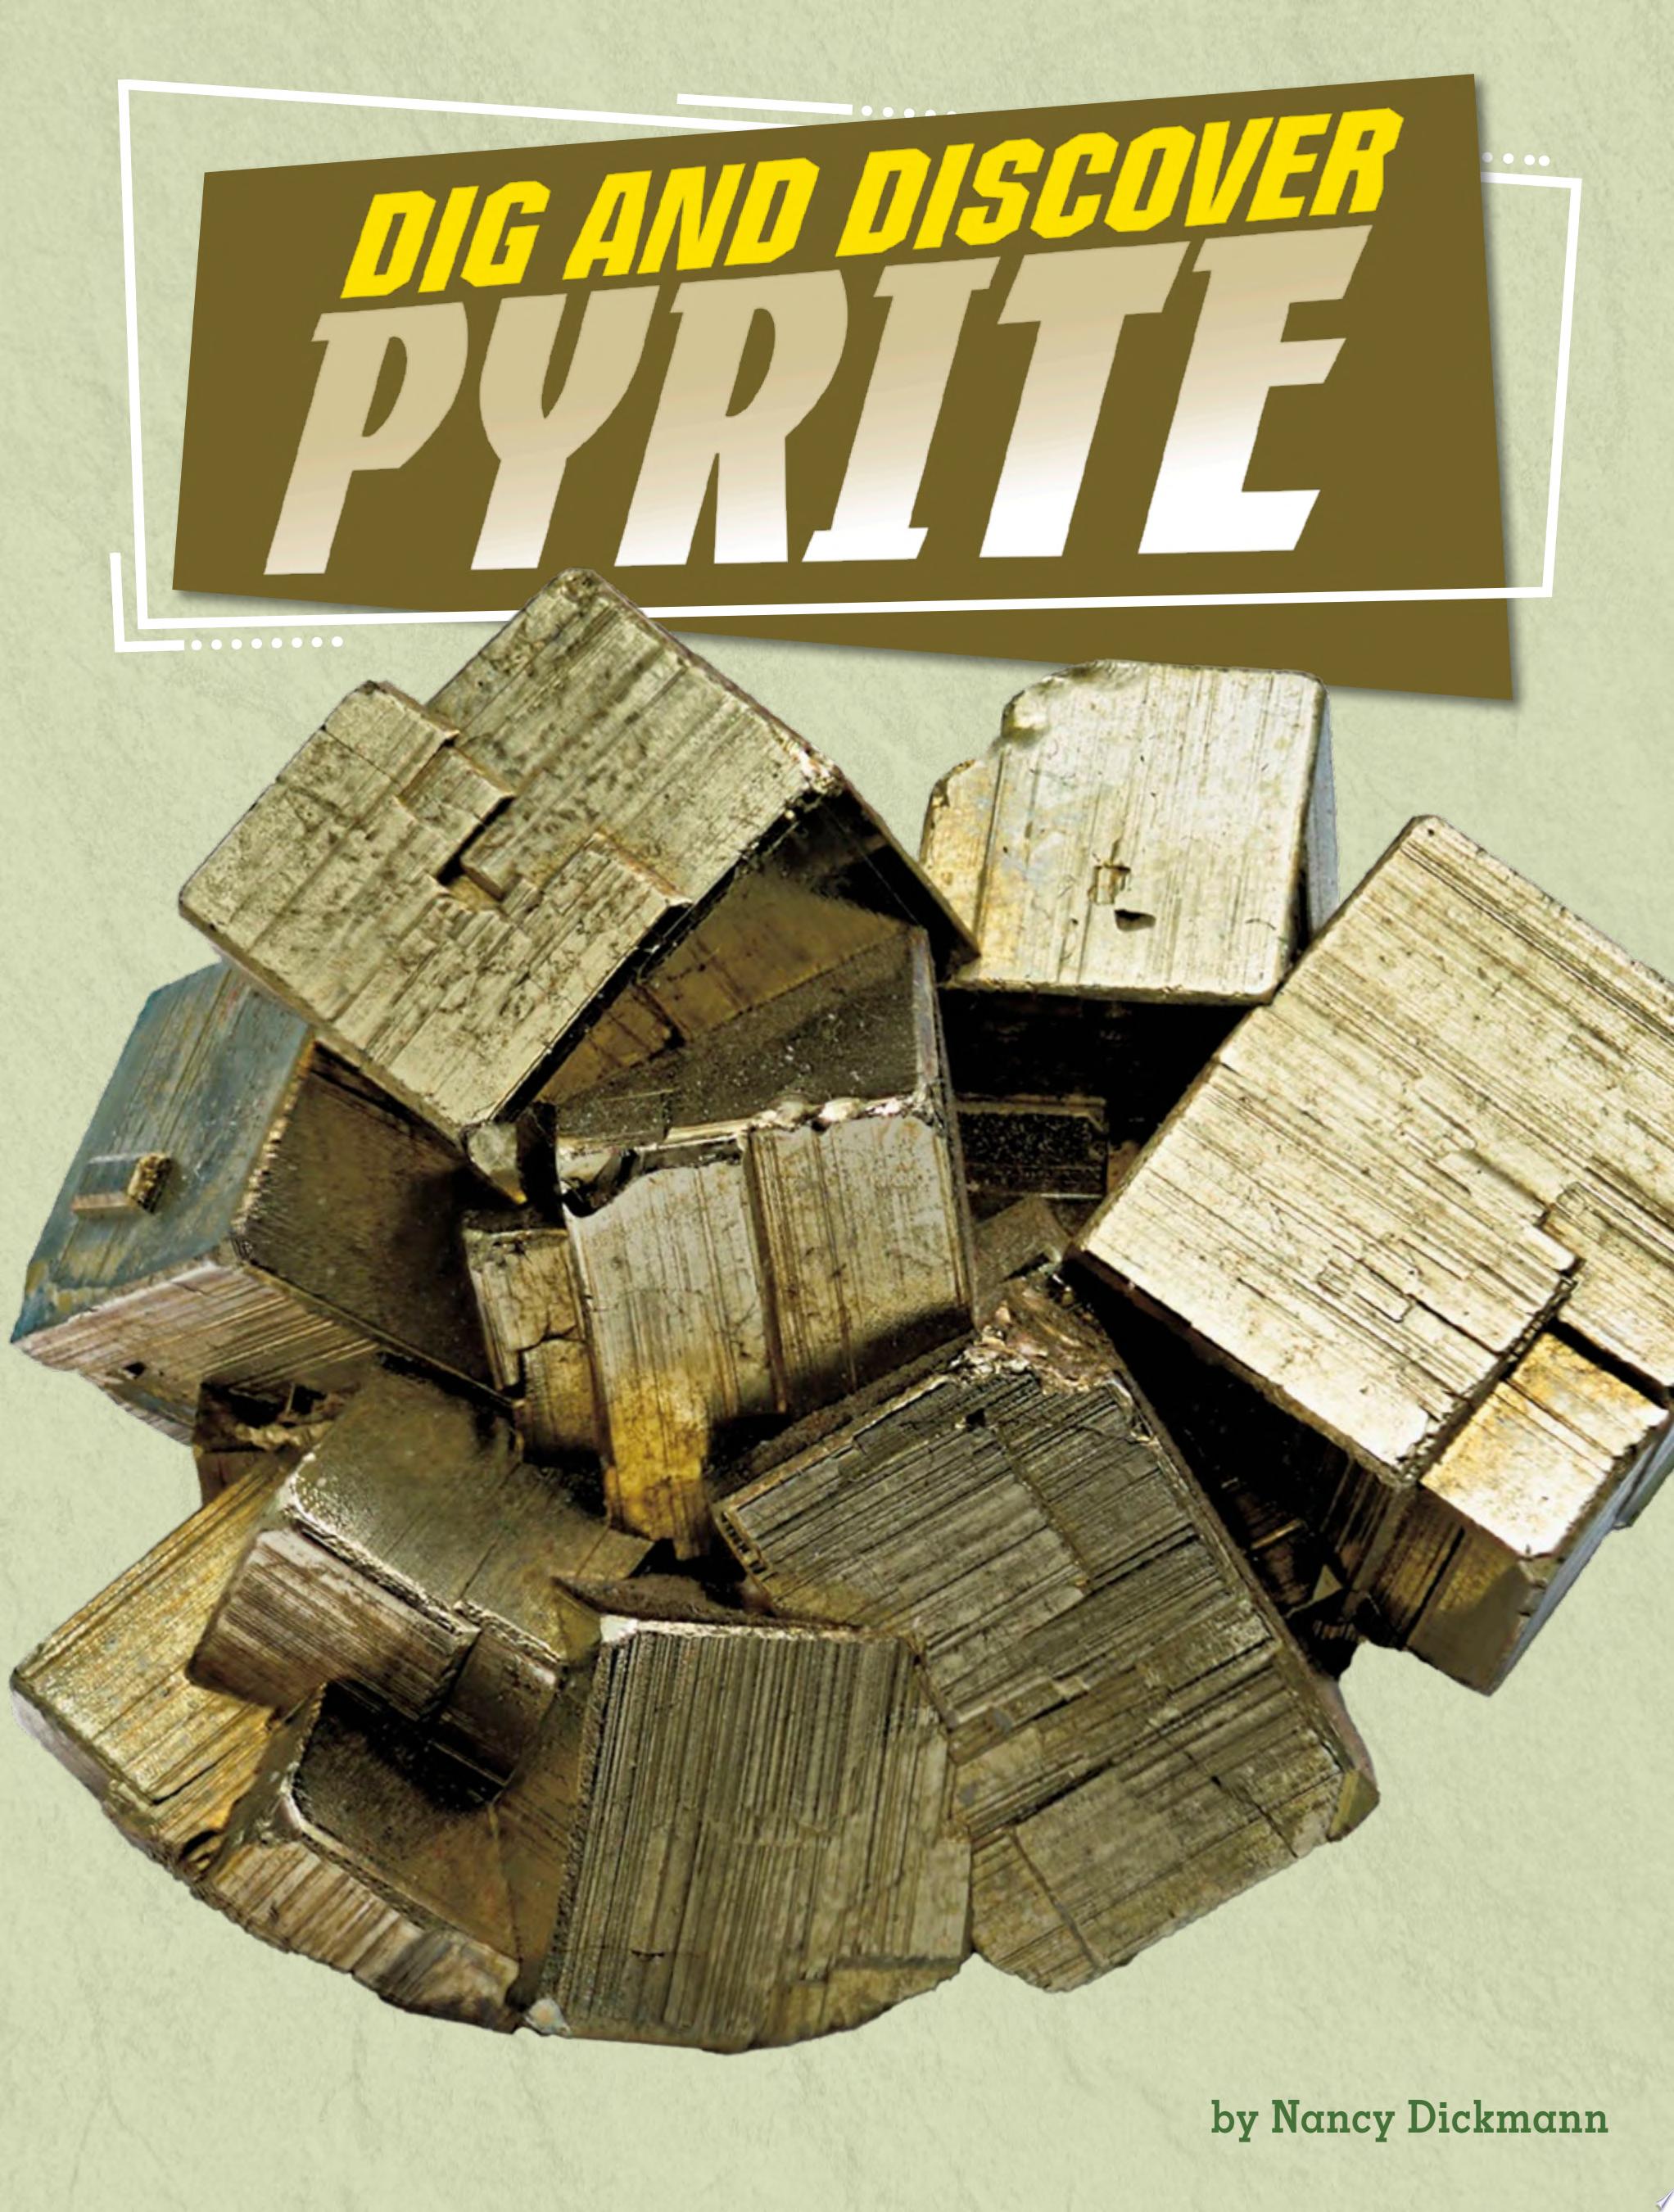 Image for "Dig and Discover Pyrite"